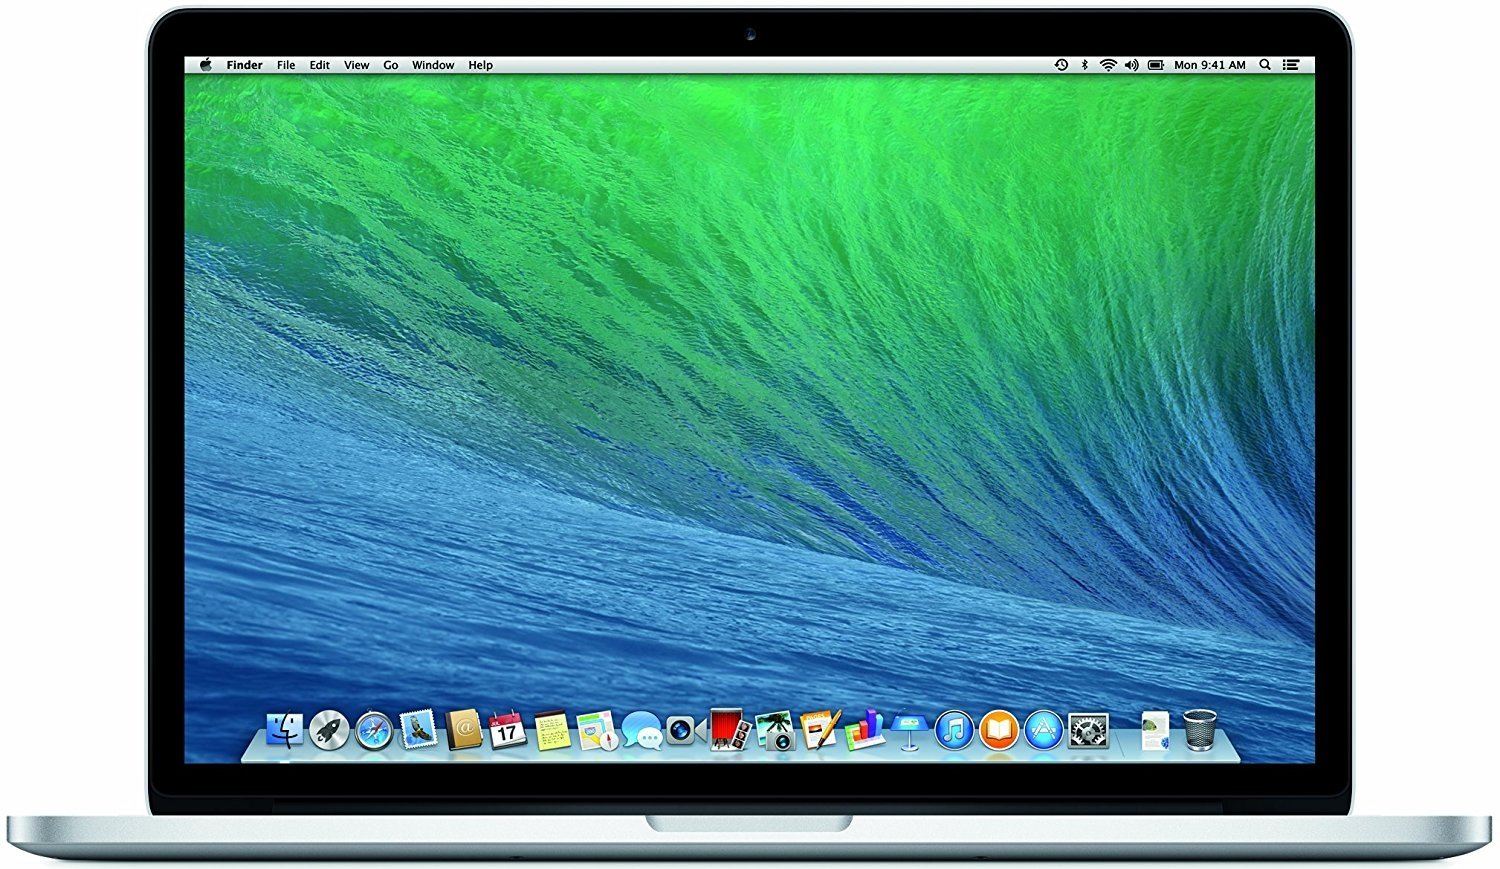 Restored Apple MacBook Pro 15.4" with Retina Display i7 8GB 256GB ME293LL/A in Silver (Refurbished) - image 1 of 3